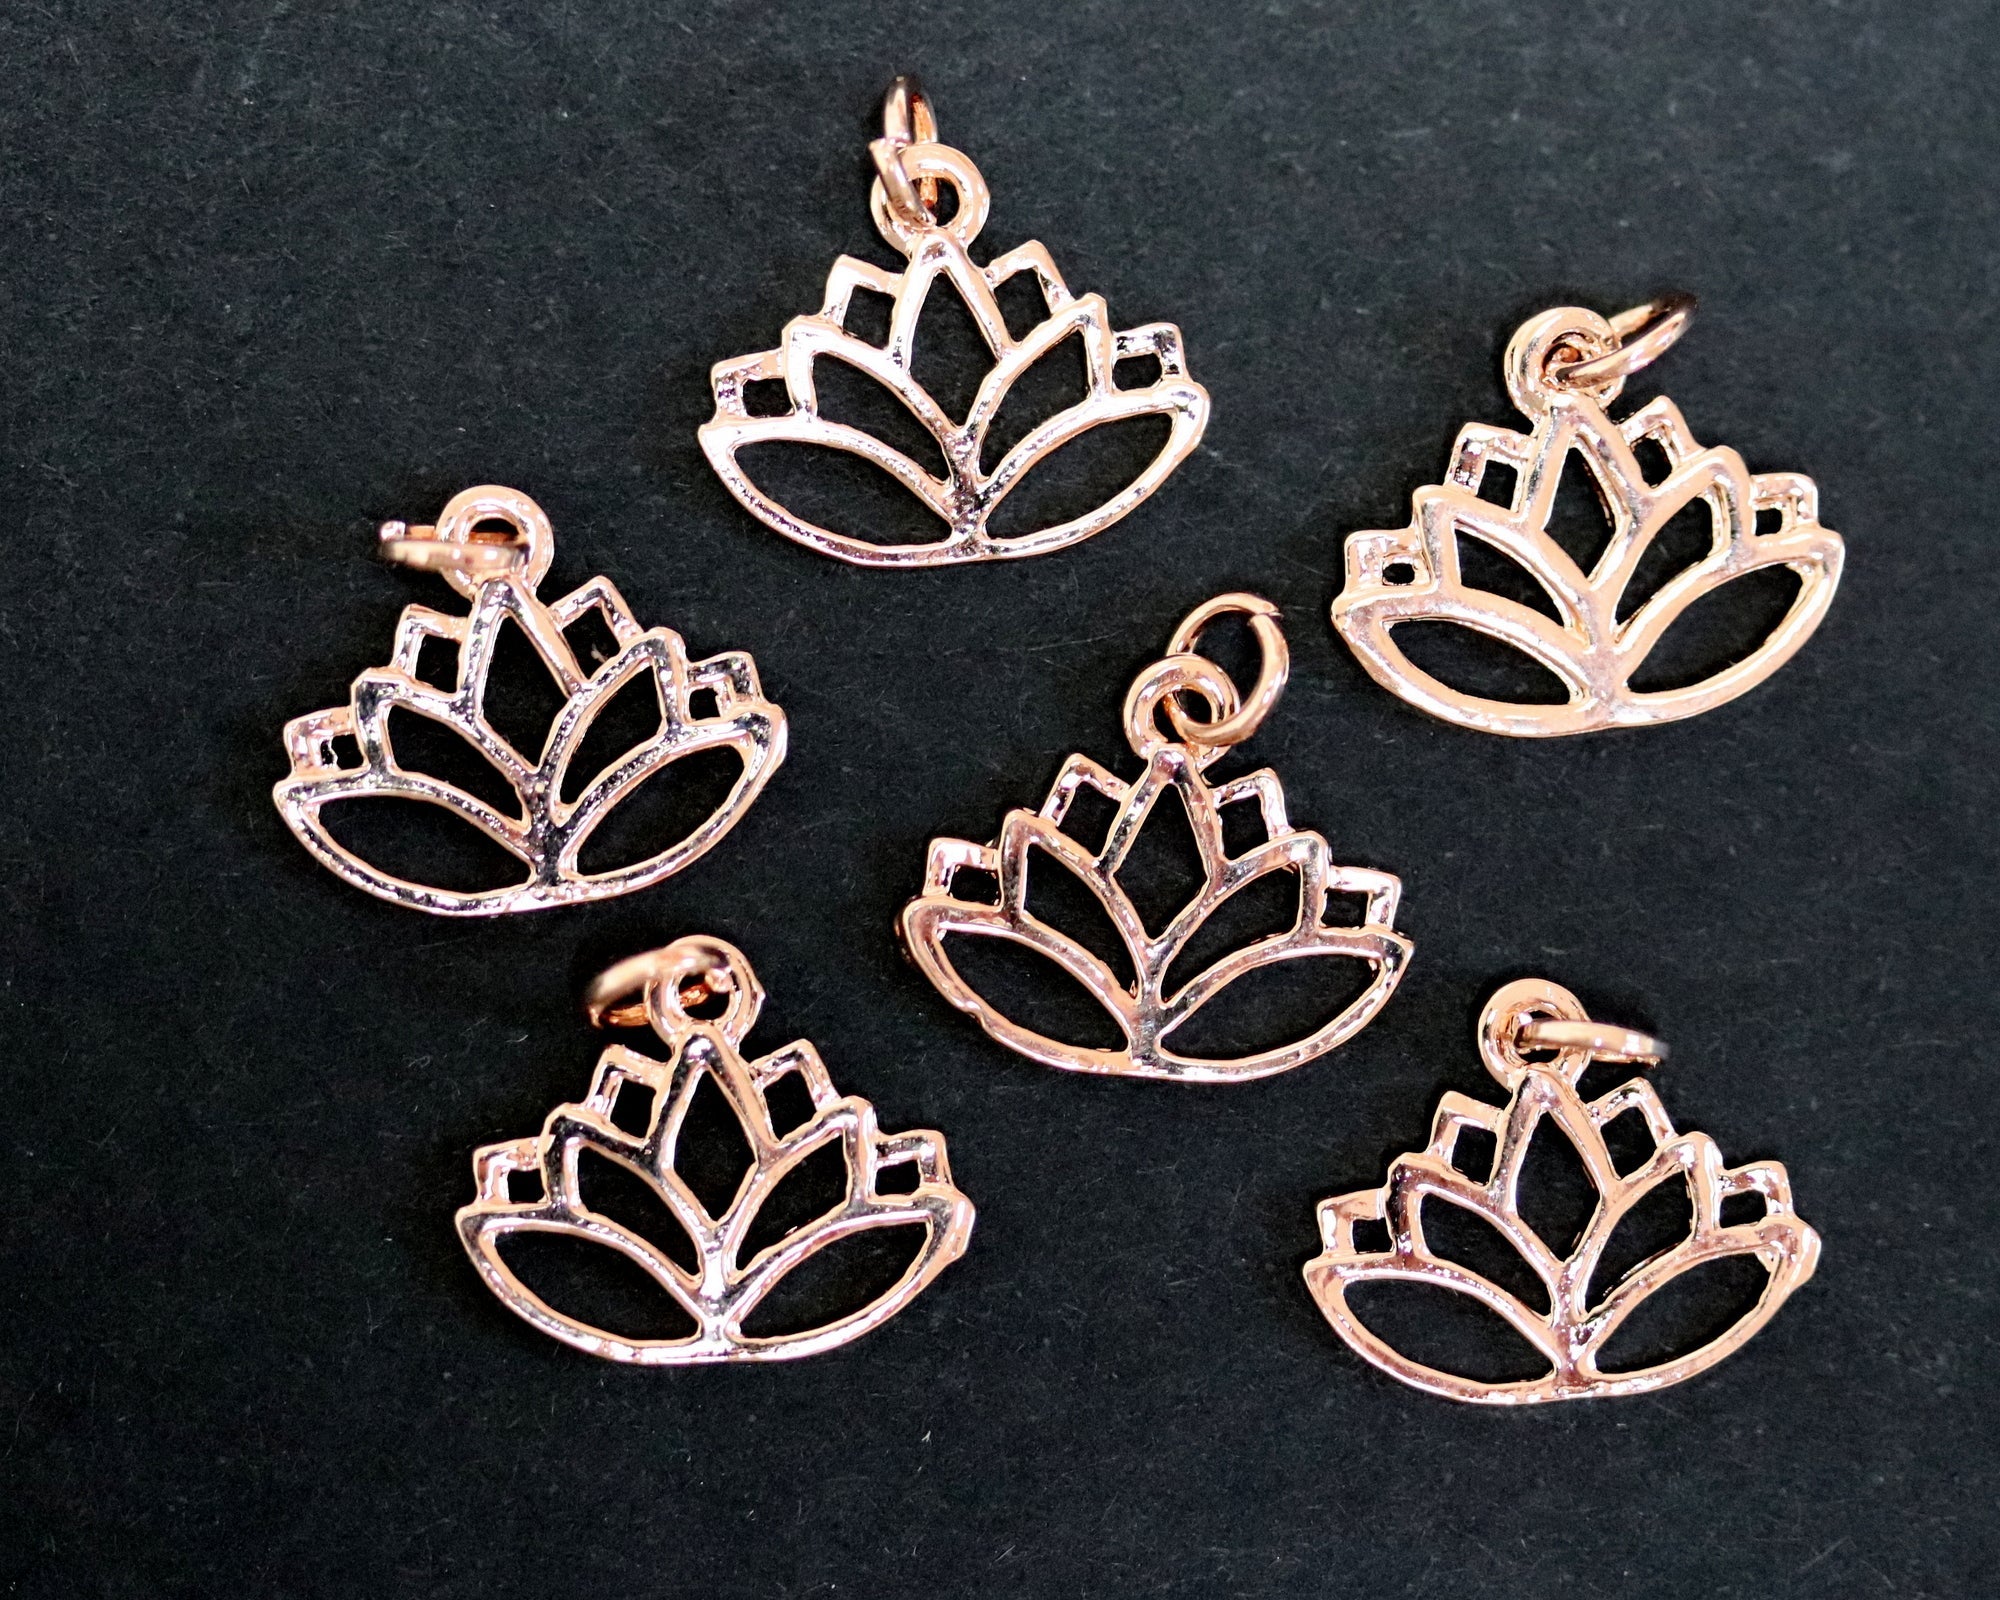 Lotus charm 14x16mm 14K Rose Gold plated metal alloy pendant